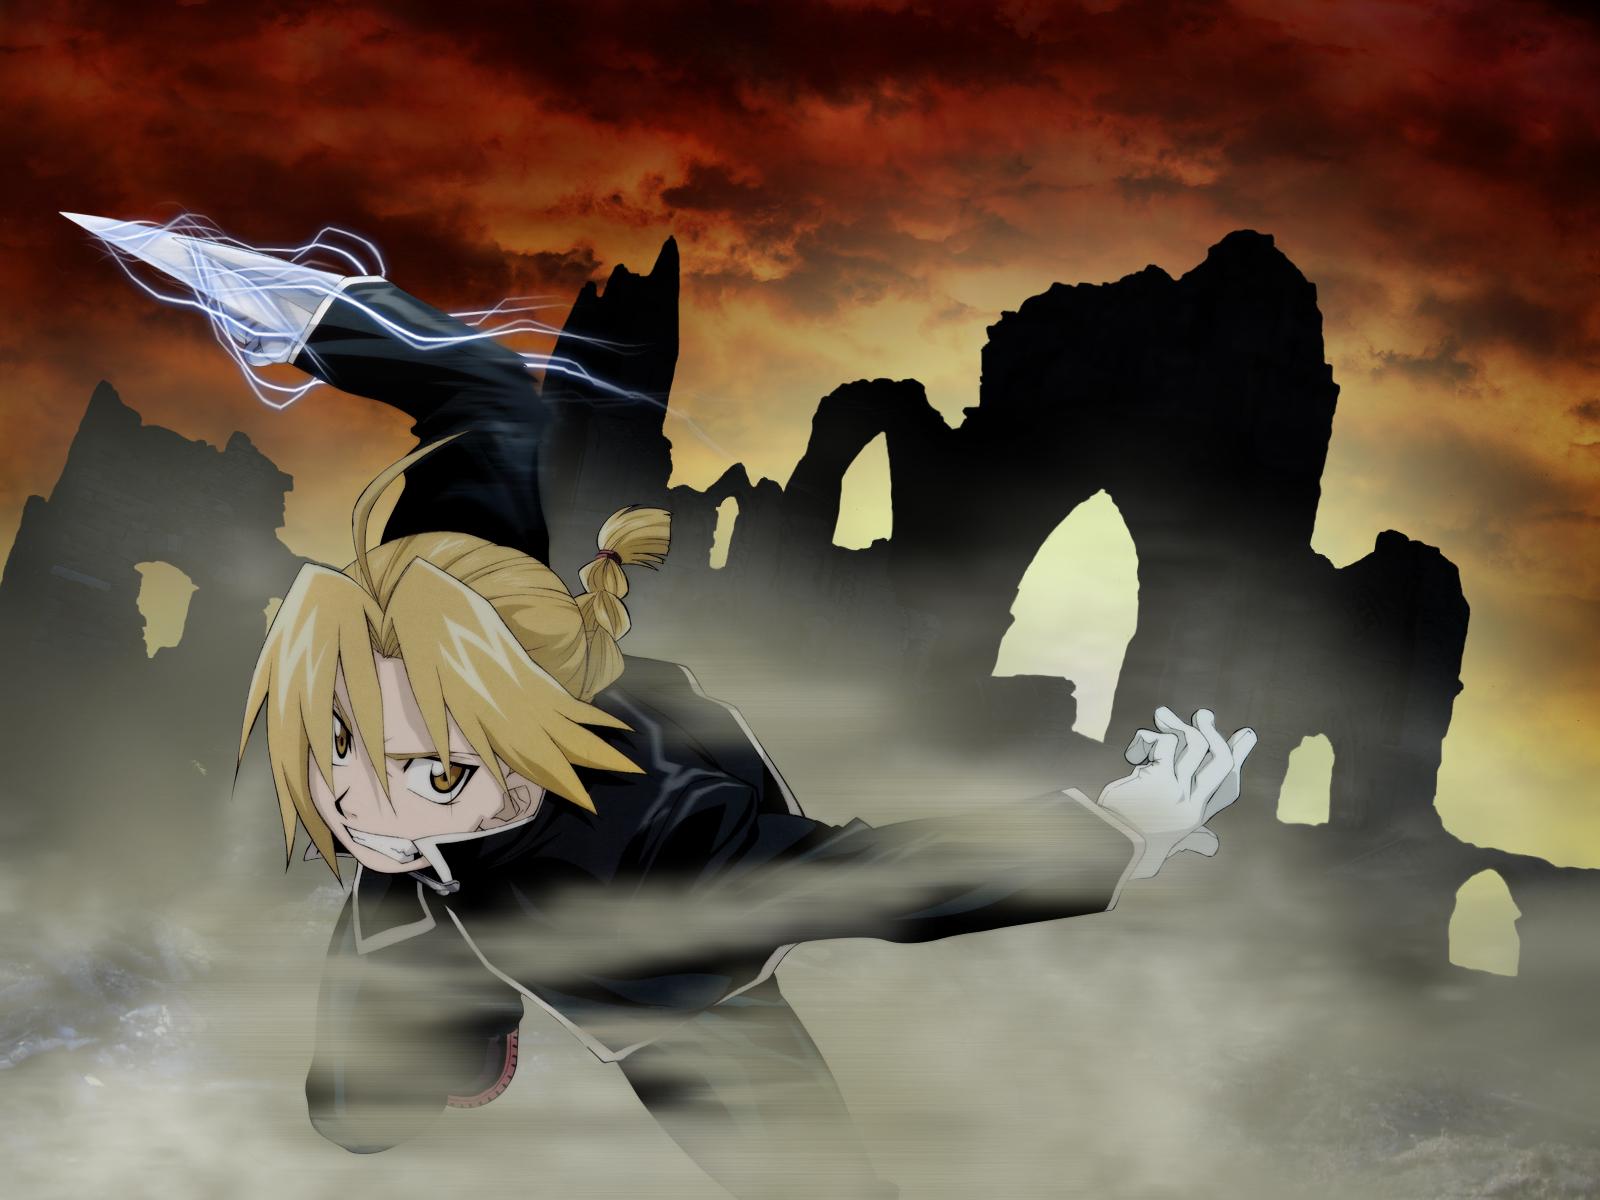 9 Times Edward Elric Stole The Show